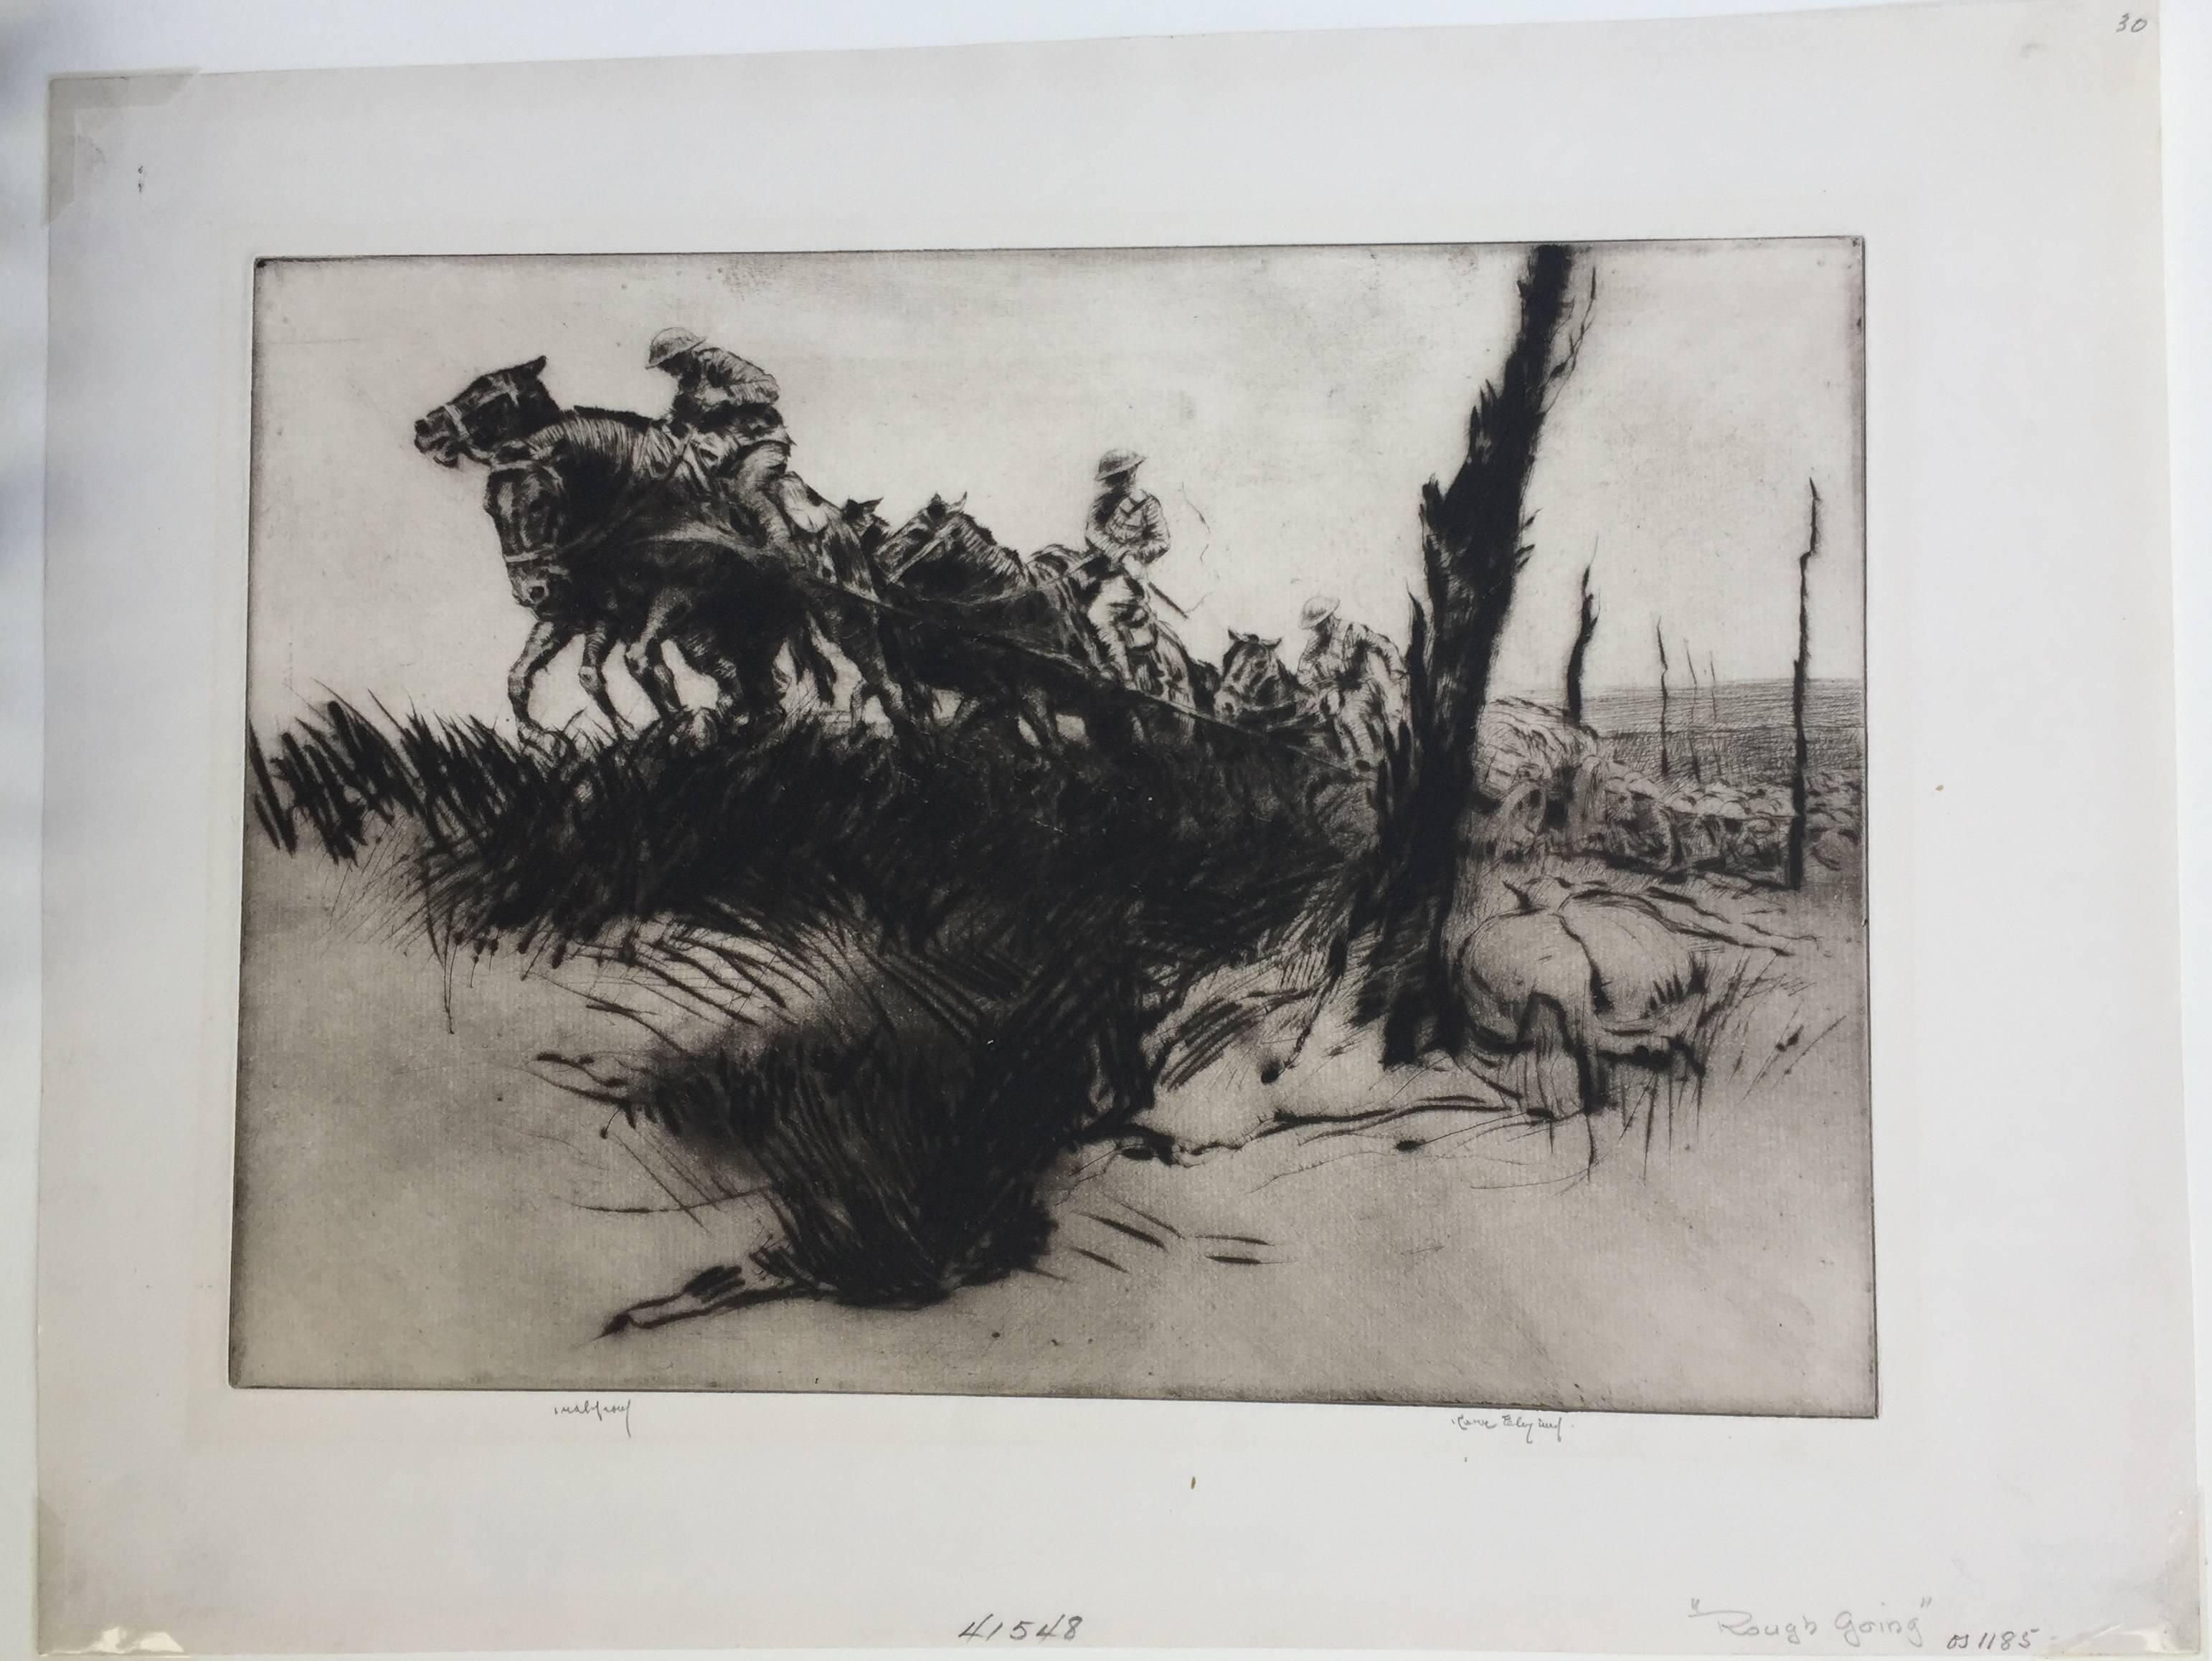 KERR (Harold) EBY (1889 - 1946)

ROUGH GOING, 1919 (Giardina 29). Drypoint, signed with imp. (meaning he printed it) and inscribed in pencil. Edition 60. 11 3/4 x 8 3/8 inches. An early impression with RICH VELVETY DRYPOINT and PLATE TONE. After